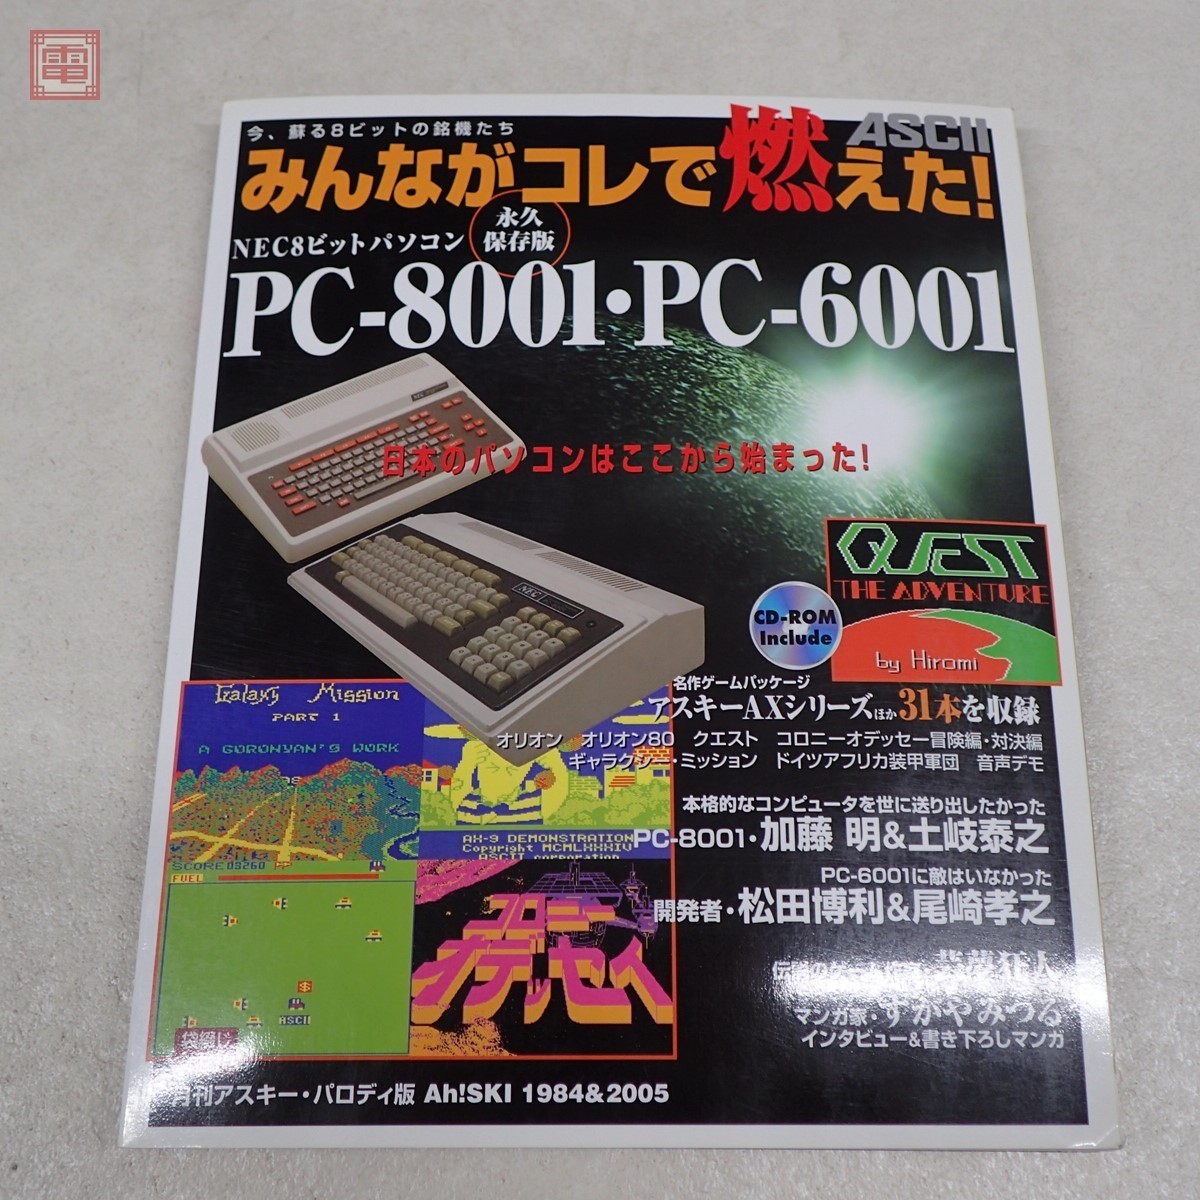  publication all .kore. burn .! NEC8 bit personal computer PC-8001*PC-6001 permanent preservation version ASCII binding * attached CD-ROM unopened 2005 year issue the first version [PP